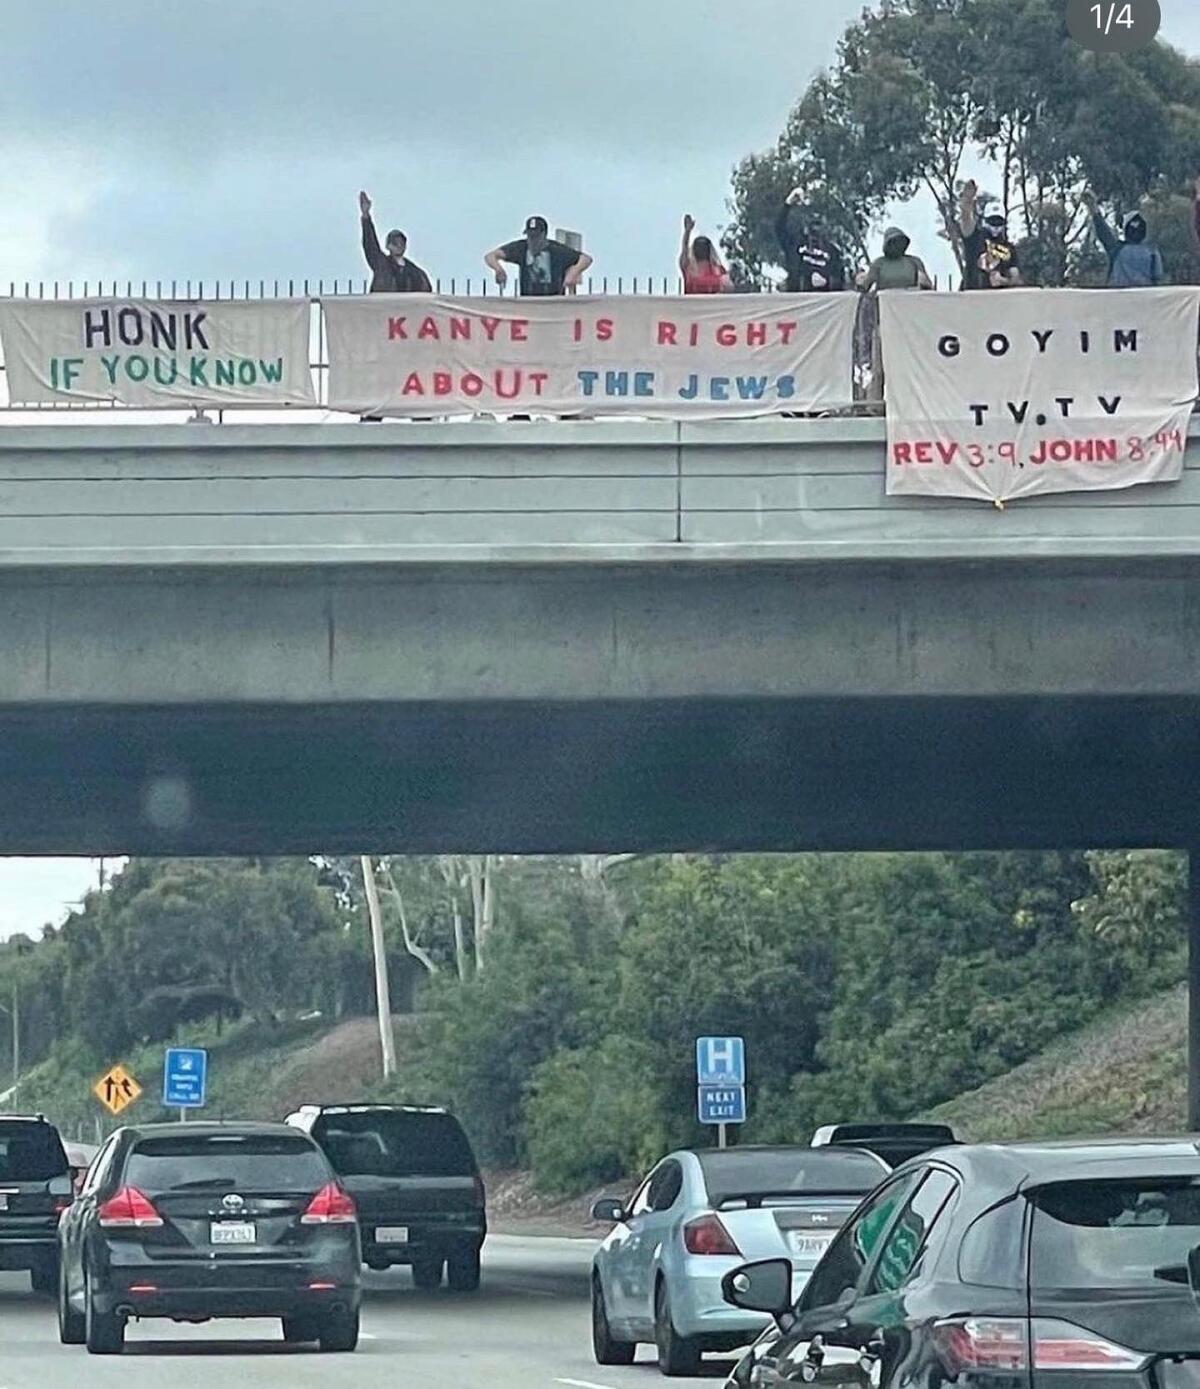 Cars driving by an overpass where people have hung antisemitic banners